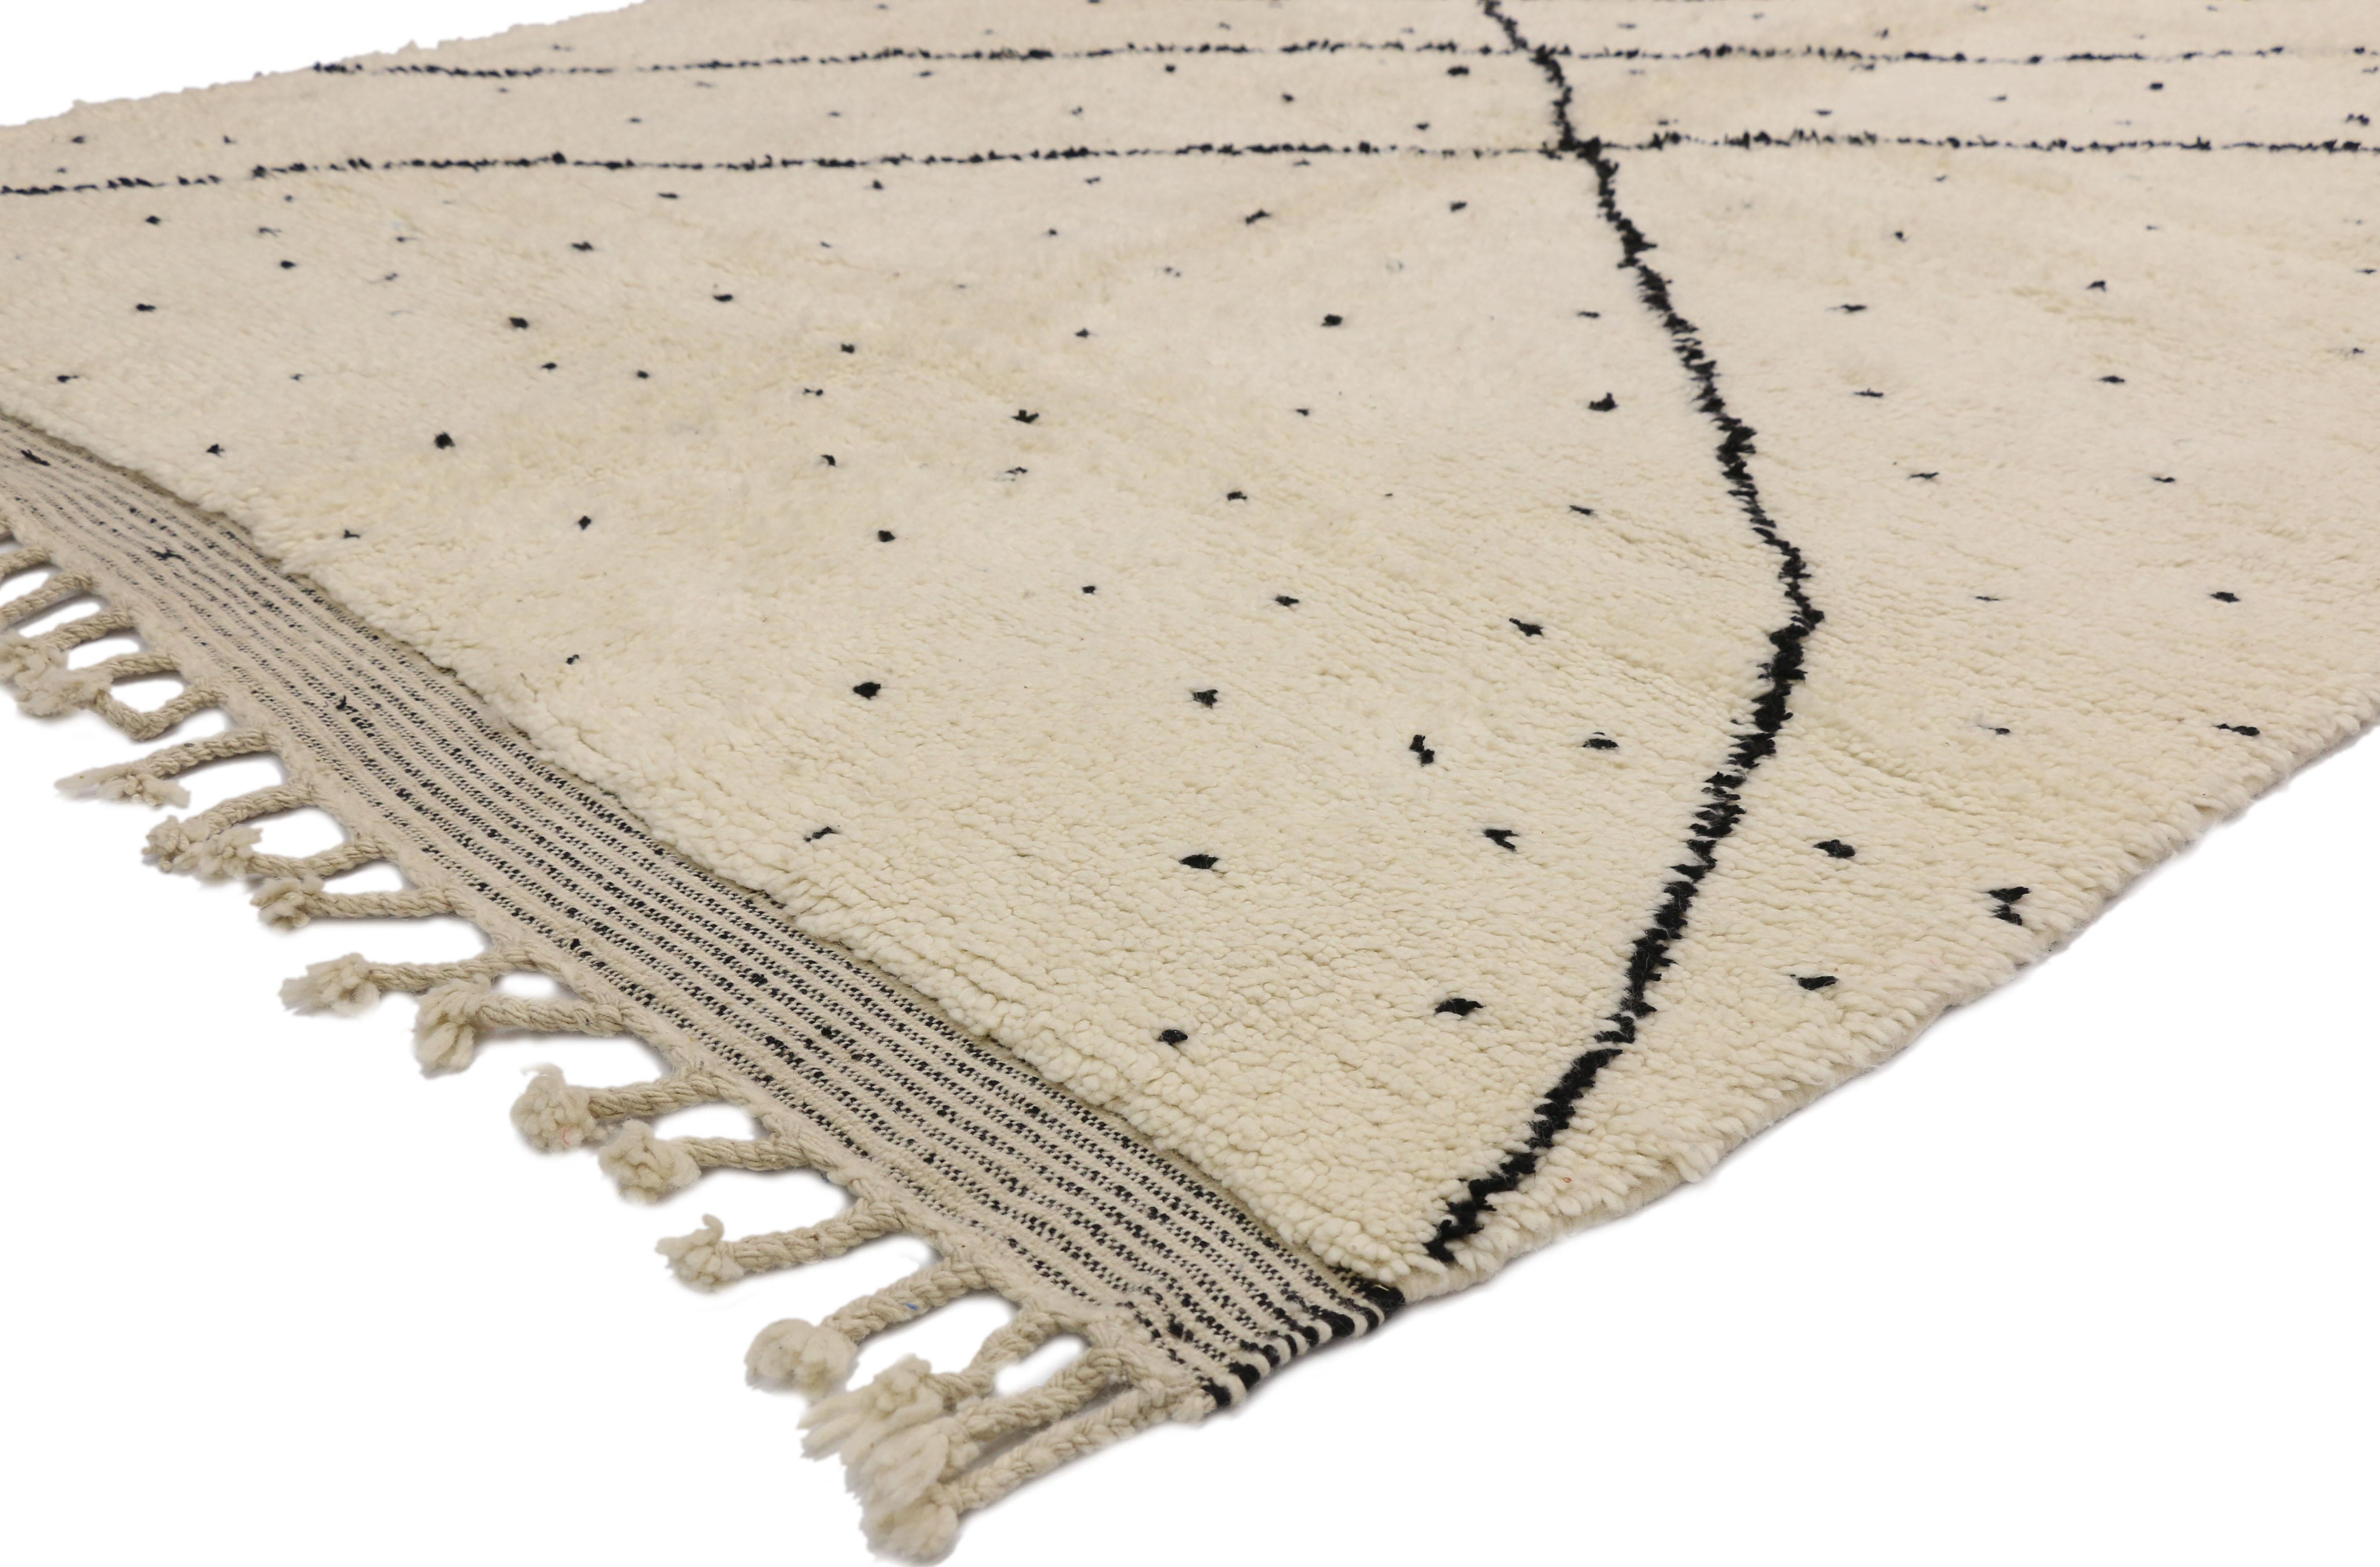 20788 Neutral Moroccan Rug, 07’04 x 09’03.
Wabi-Sabi meets subtle sophistication in this hand knotted wool Berber Moroccan rug. The timeless allure and neutral colors woven into this piece work together creating a laidback yet ultra stylish look.